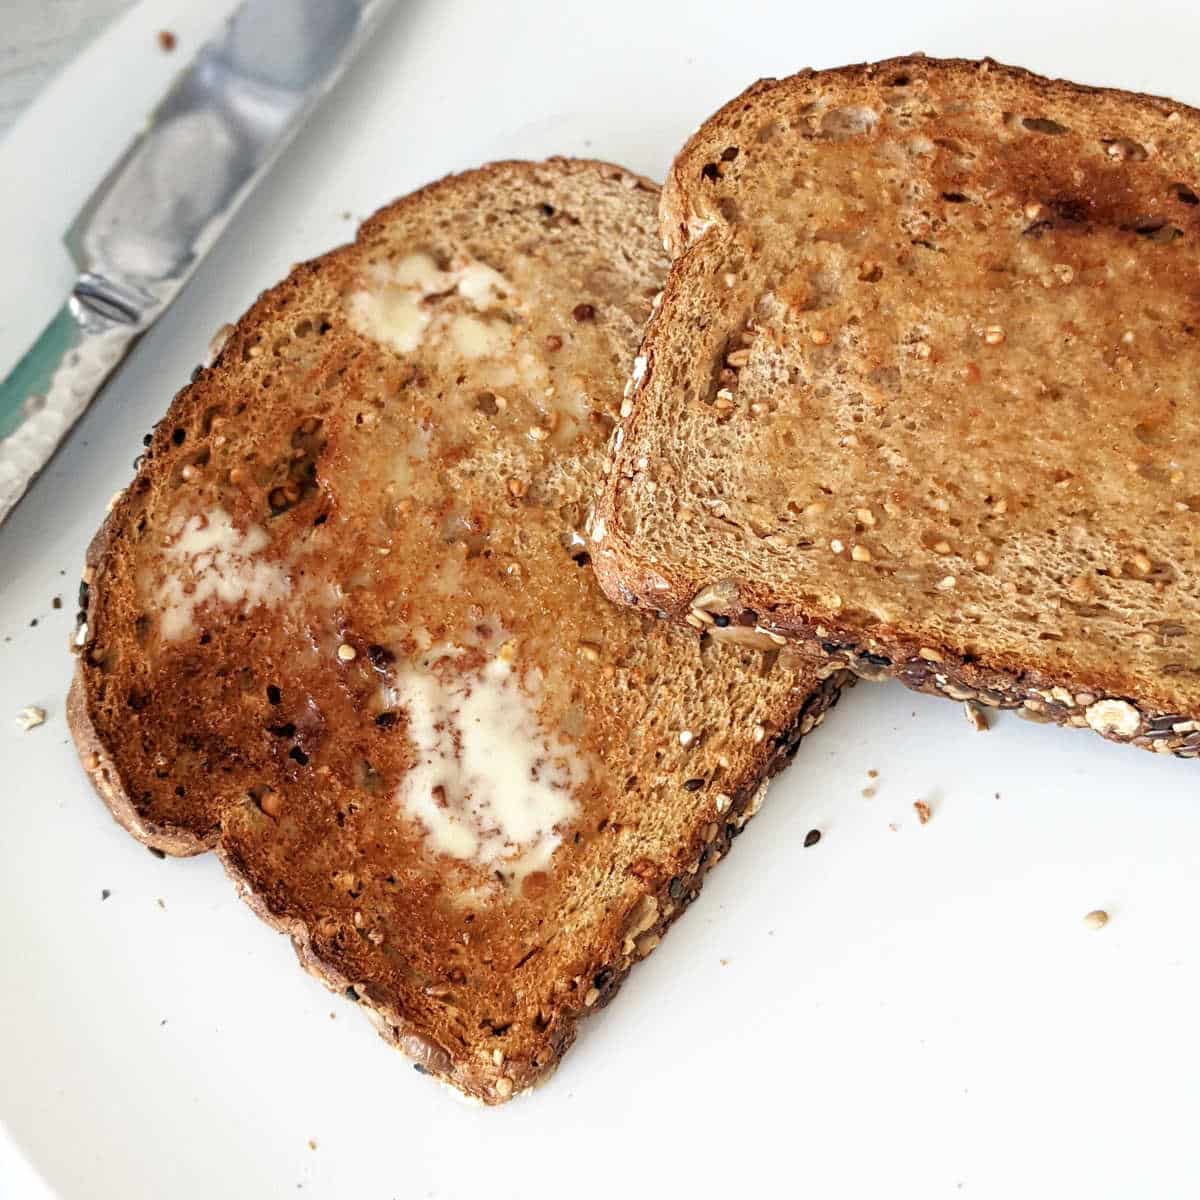 Toast smeared with butter.